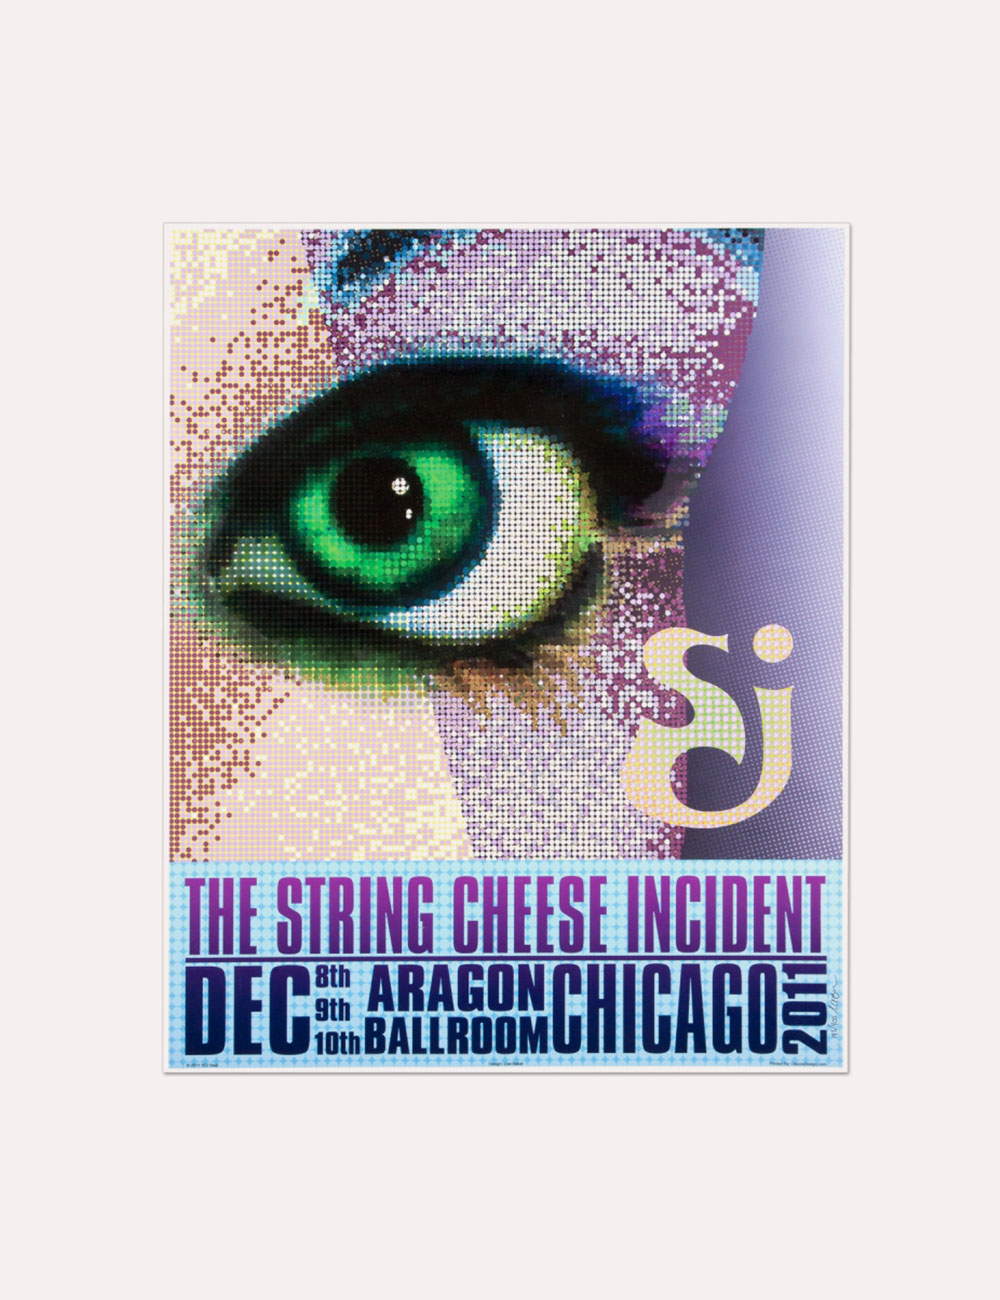 The String Cheese Incident - Merch - Poster - 2011 Chicago Poster